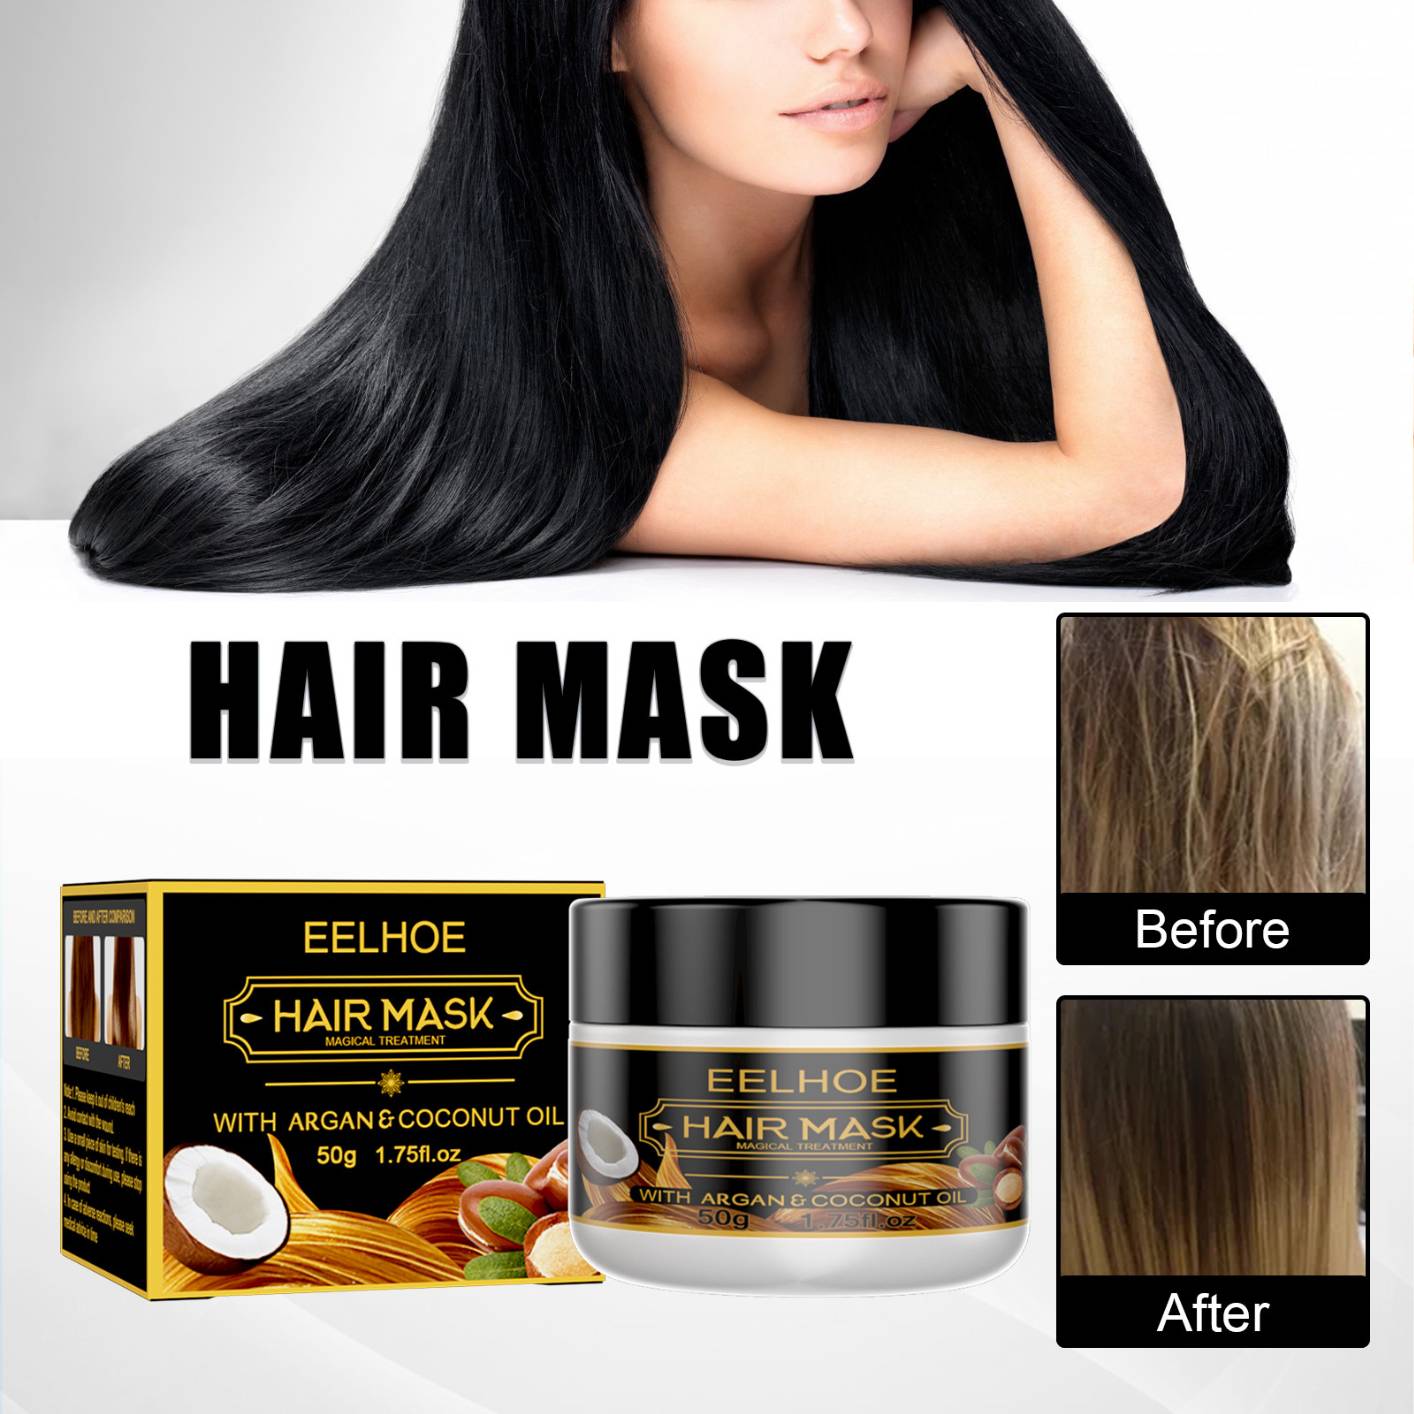 Hair Mask with Argan Oil and Coconut Oil, Deep Moisturizing Improves Dyeing, Perming, Frizz, Softening, Fluffy Repairing Conditioner Hair Mask